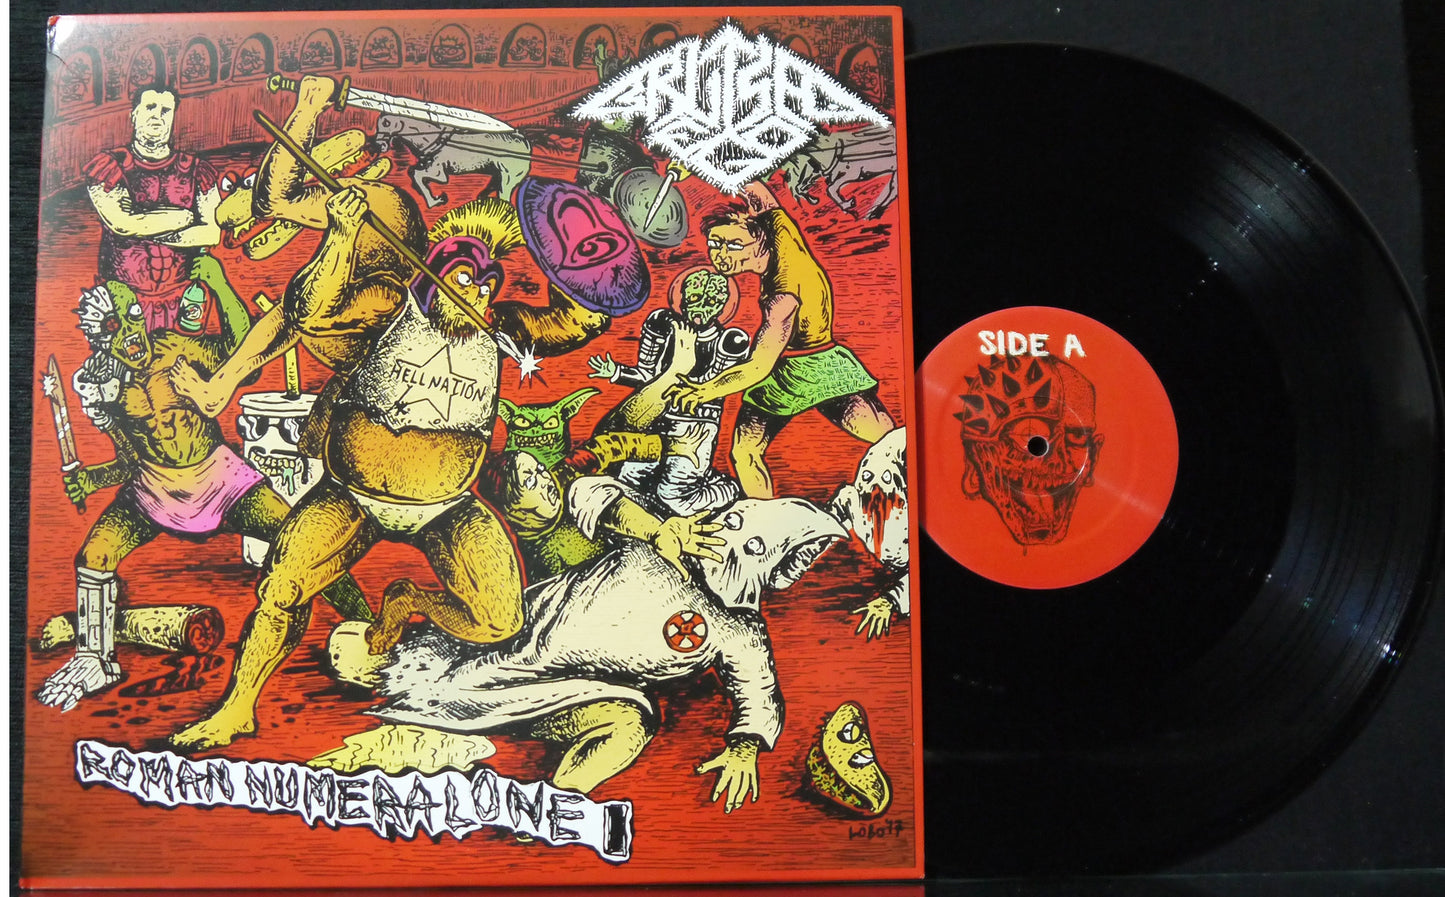 BRUISED EGO - Roman Numeral One 12"